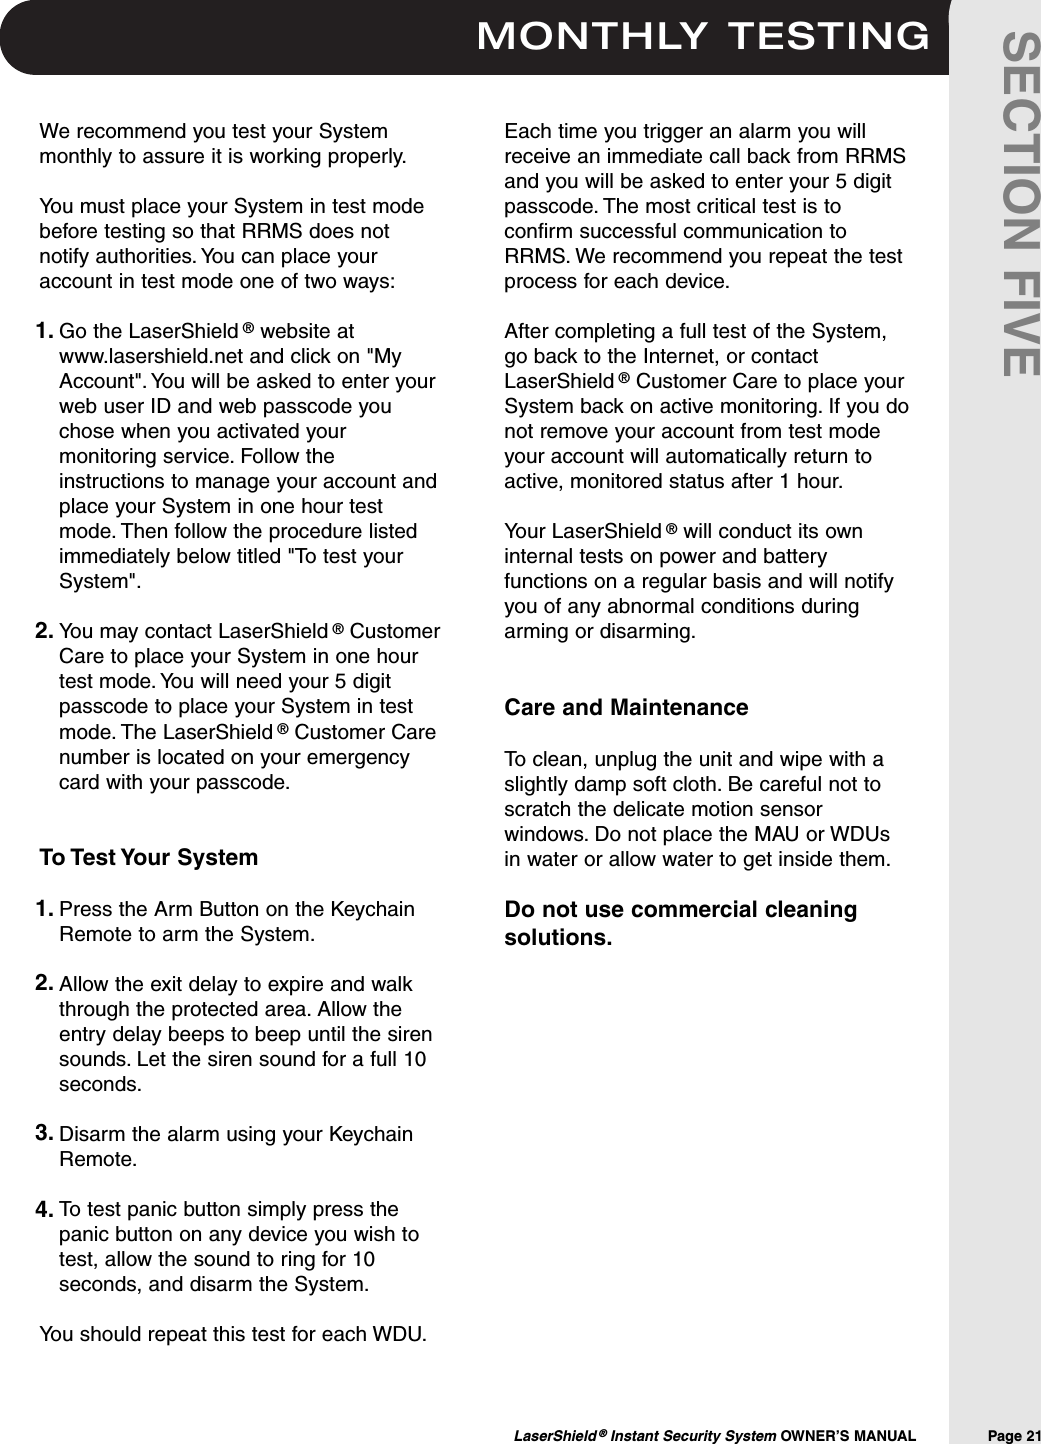 MONTHLY TESTINGLaserShield ®Instant Security System OWNER’S MANUAL                Page 21SECTION FIVEWe recommend you test your Systemmonthly to assure it is working properly.You must place your System in test modebefore testing so that RRMS does notnotify authorities. You can place youraccount in test mode one of two ways:Go the LaserShield ®website atwww.lasershield.net and click on &quot;MyAccount&quot;. You will be asked to enter yourweb user ID and web passcode youchose when you activated yourmonitoring service. Follow theinstructions to manage your account andplace your System in one hour testmode. Then follow the procedure listedimmediately below titled &quot;To test yourSystem&quot;.You may contact LaserShield ®CustomerCare to place your System in one hourtest mode. You will need your 5 digitpasscode to place your System in testmode. The LaserShield ®Customer Carenumber is located on your emergencycard with your passcode.To Test Your SystemPress the Arm Button on the KeychainRemote to arm the System.Allow the exit delay to expire and walkthrough the protected area. Allow theentry delay beeps to beep until the sirensounds. Let the siren sound for a full 10seconds.Disarm the alarm using your KeychainRemote.To test panic button simply press thepanic button on any device you wish totest, allow the sound to ring for 10seconds, and disarm the System.You should repeat this test for each WDU.Each time you trigger an alarm you willreceive an immediate call back from RRMSand you will be asked to enter your 5 digitpasscode. The most critical test is toconfirm successful communication toRRMS. We recommend you repeat the testprocess for each device.After completing a full test of the System,go back to the Internet, or contactLaserShield ®Customer Care to place yourSystem back on active monitoring. If you donot remove your account from test modeyour account will automatically return toactive, monitored status after 1 hour.Your LaserShield ®will conduct its owninternal tests on power and batteryfunctions on a regular basis and will notifyyou of any abnormal conditions duringarming or disarming.Care and MaintenanceTo clean, unplug the unit and wipe with aslightly damp soft cloth. Be careful not toscratch the delicate motion sensorwindows. Do not place the MAU or WDUsin water or allow water to get inside them.Do not use commercial cleaningsolutions.1.2.1.2.3.4.